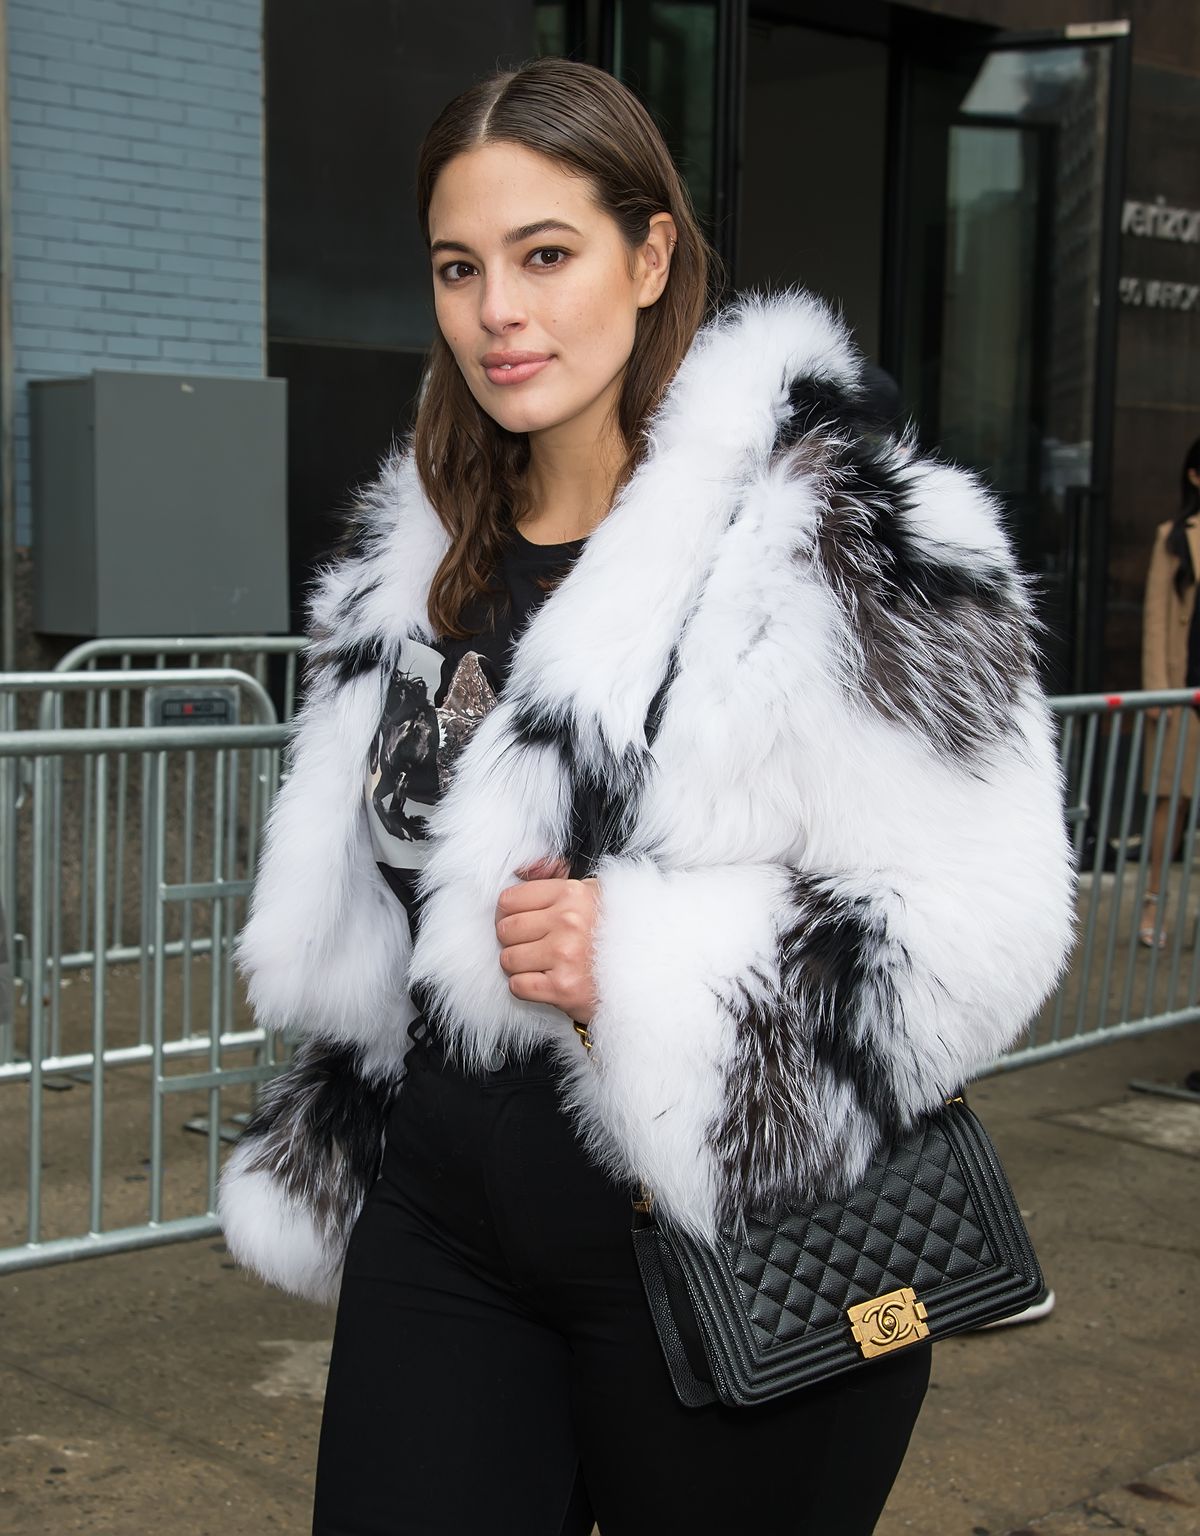 Ashley Graham with her beloved Chanel Boy bag during New York Fashion Week in February 2017.